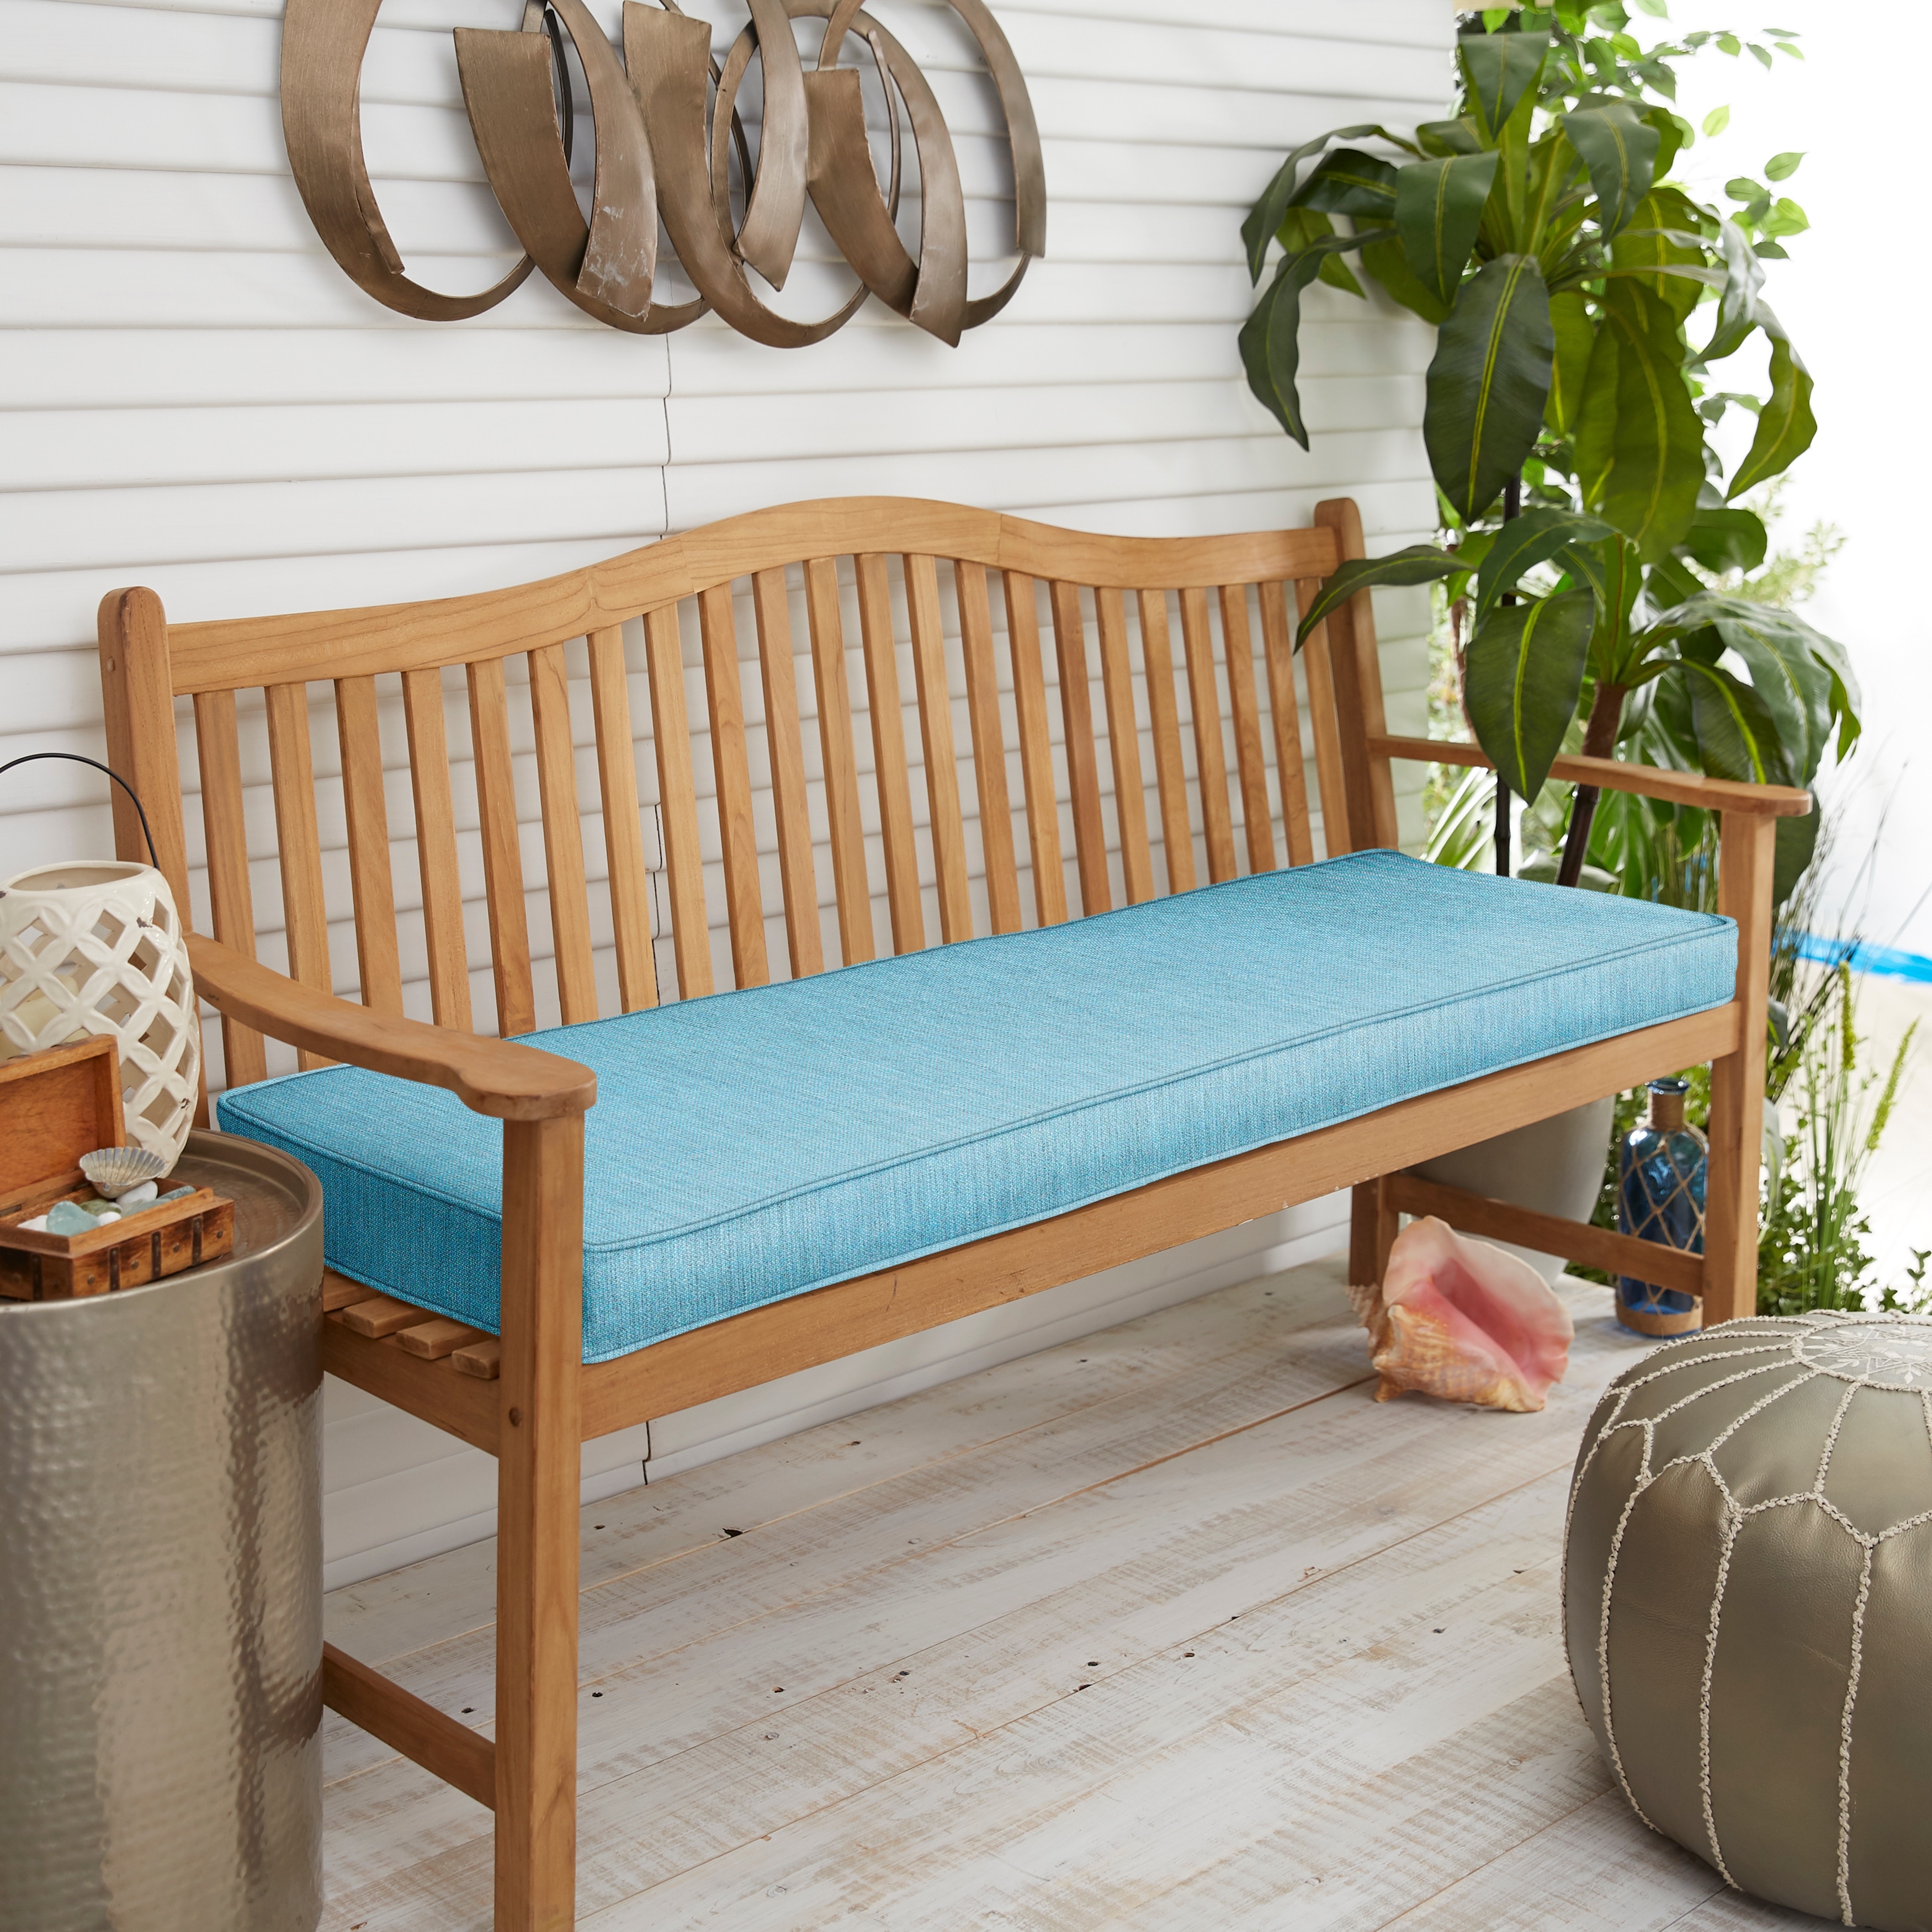 https://ak1.ostkcdn.com/images/products/is/images/direct/b96eb9995c87a8ce73d835652e99bea202d4796c/Sunbrella-Indoor--Outdoor-Bench-Cushion-55%22-to-60%22%2C-Corded.jpg